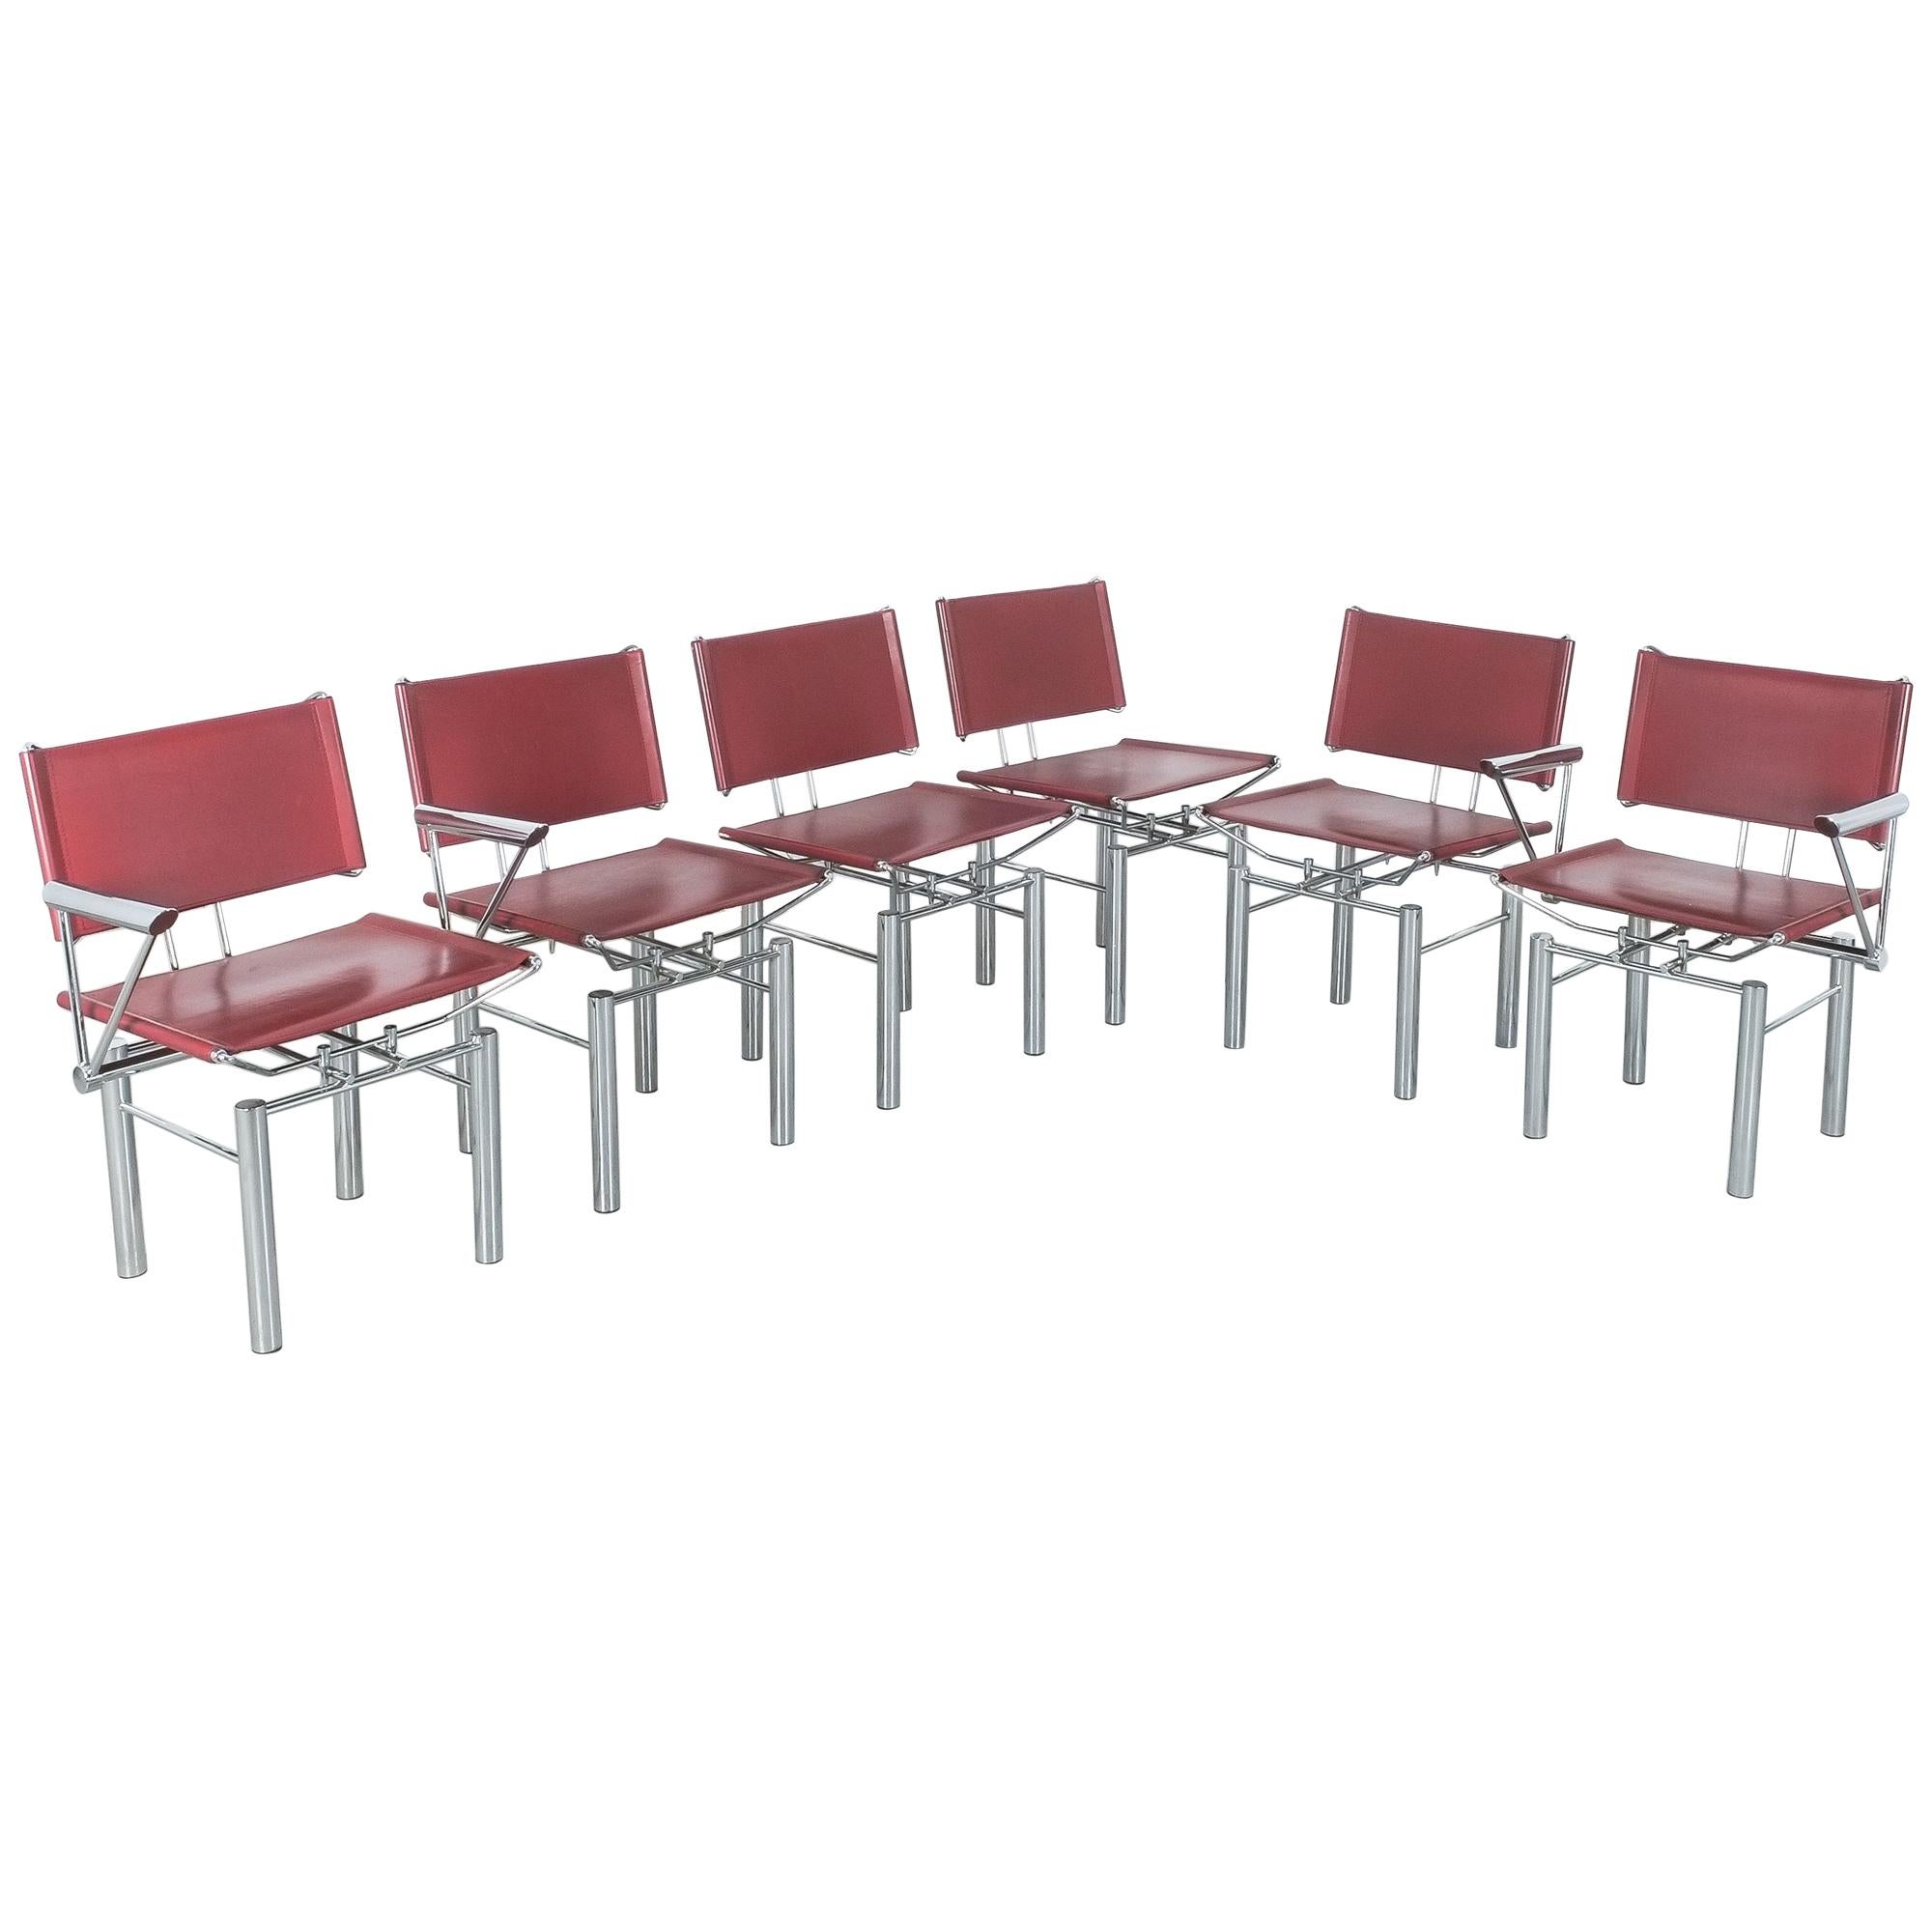 Hans Ullrich Bitsch Chairs Set of 6 Red Leather Chrome Metal Series 8600, 1980 For Sale